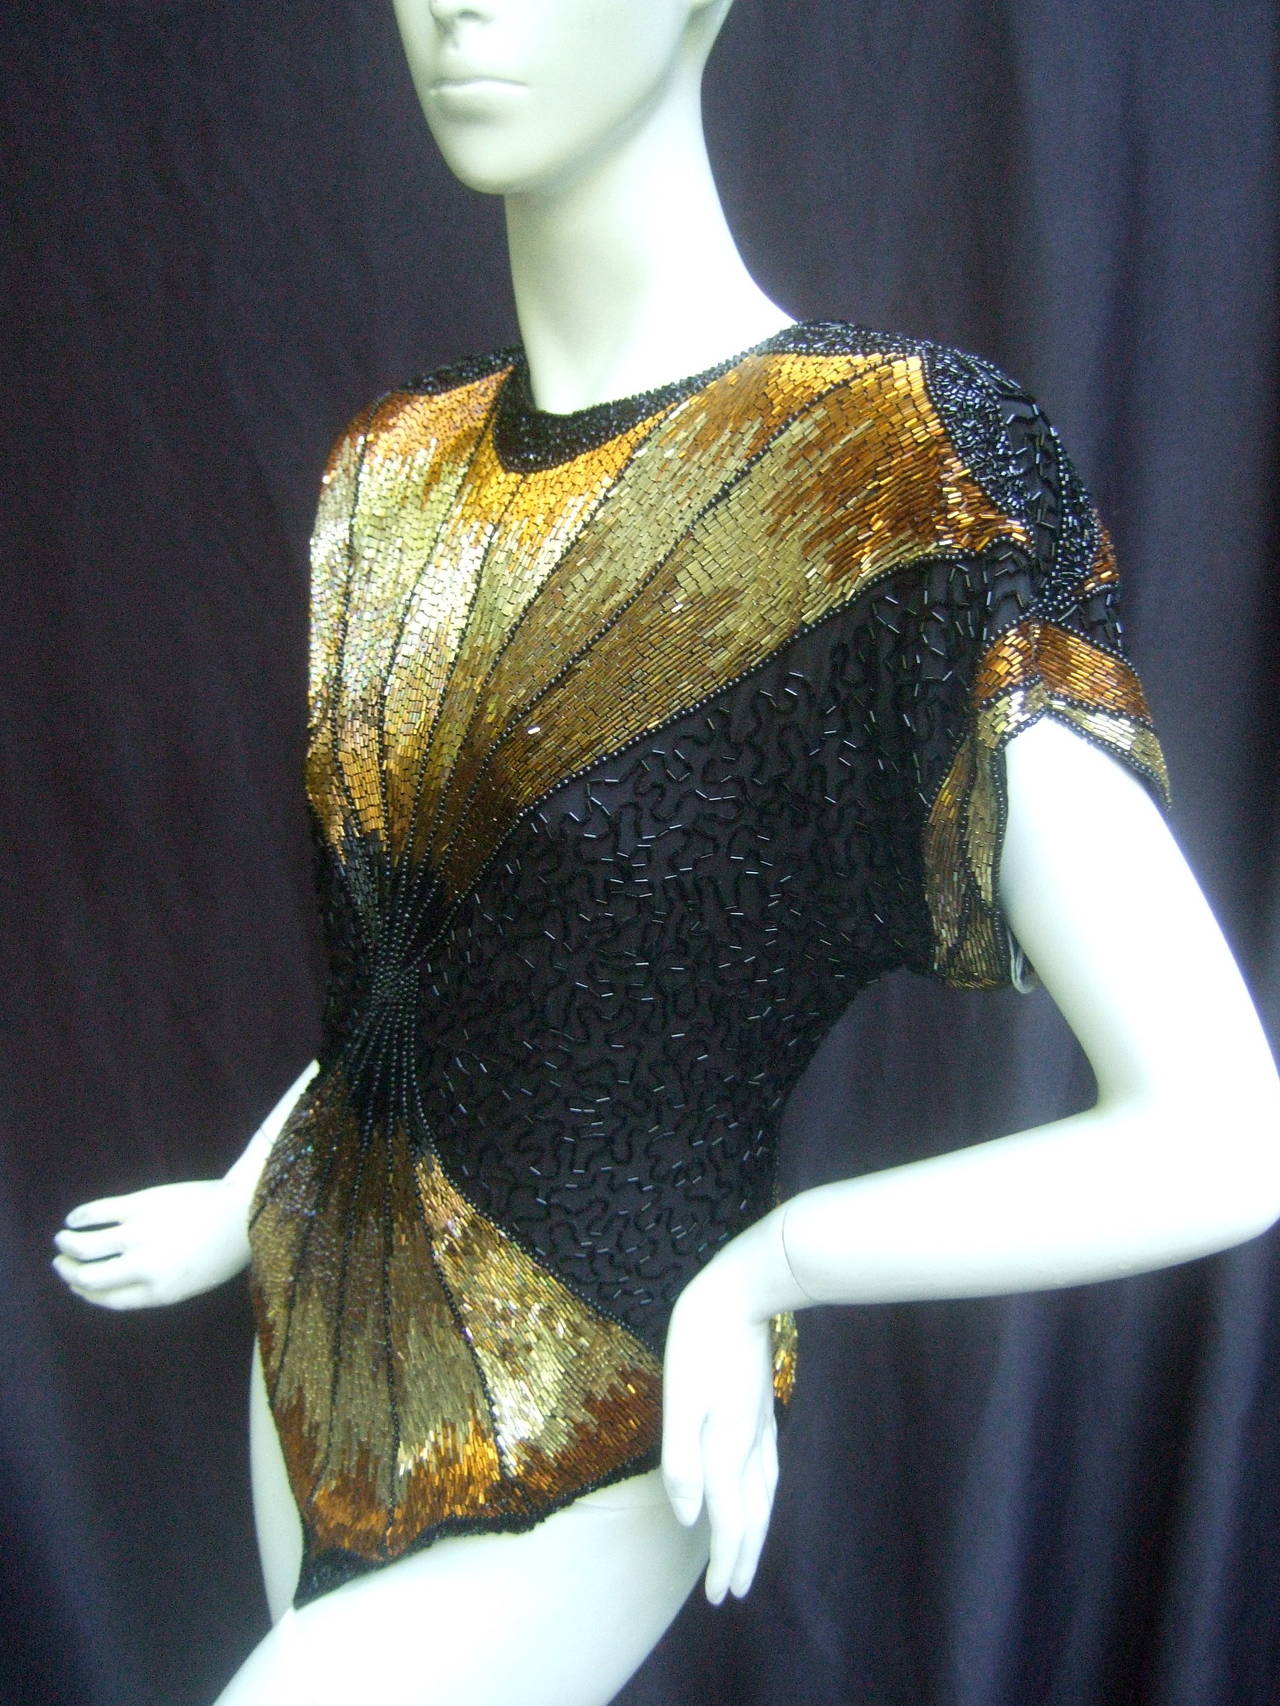 Oleg Cassini Lavish silk beaded top Size small 
The dramatic show stopping silk top is embellished
with elaborate beading in golden bronze metallic hues

The glittering bugle beads are intricately designed
in mosaic of radiating beams; in a